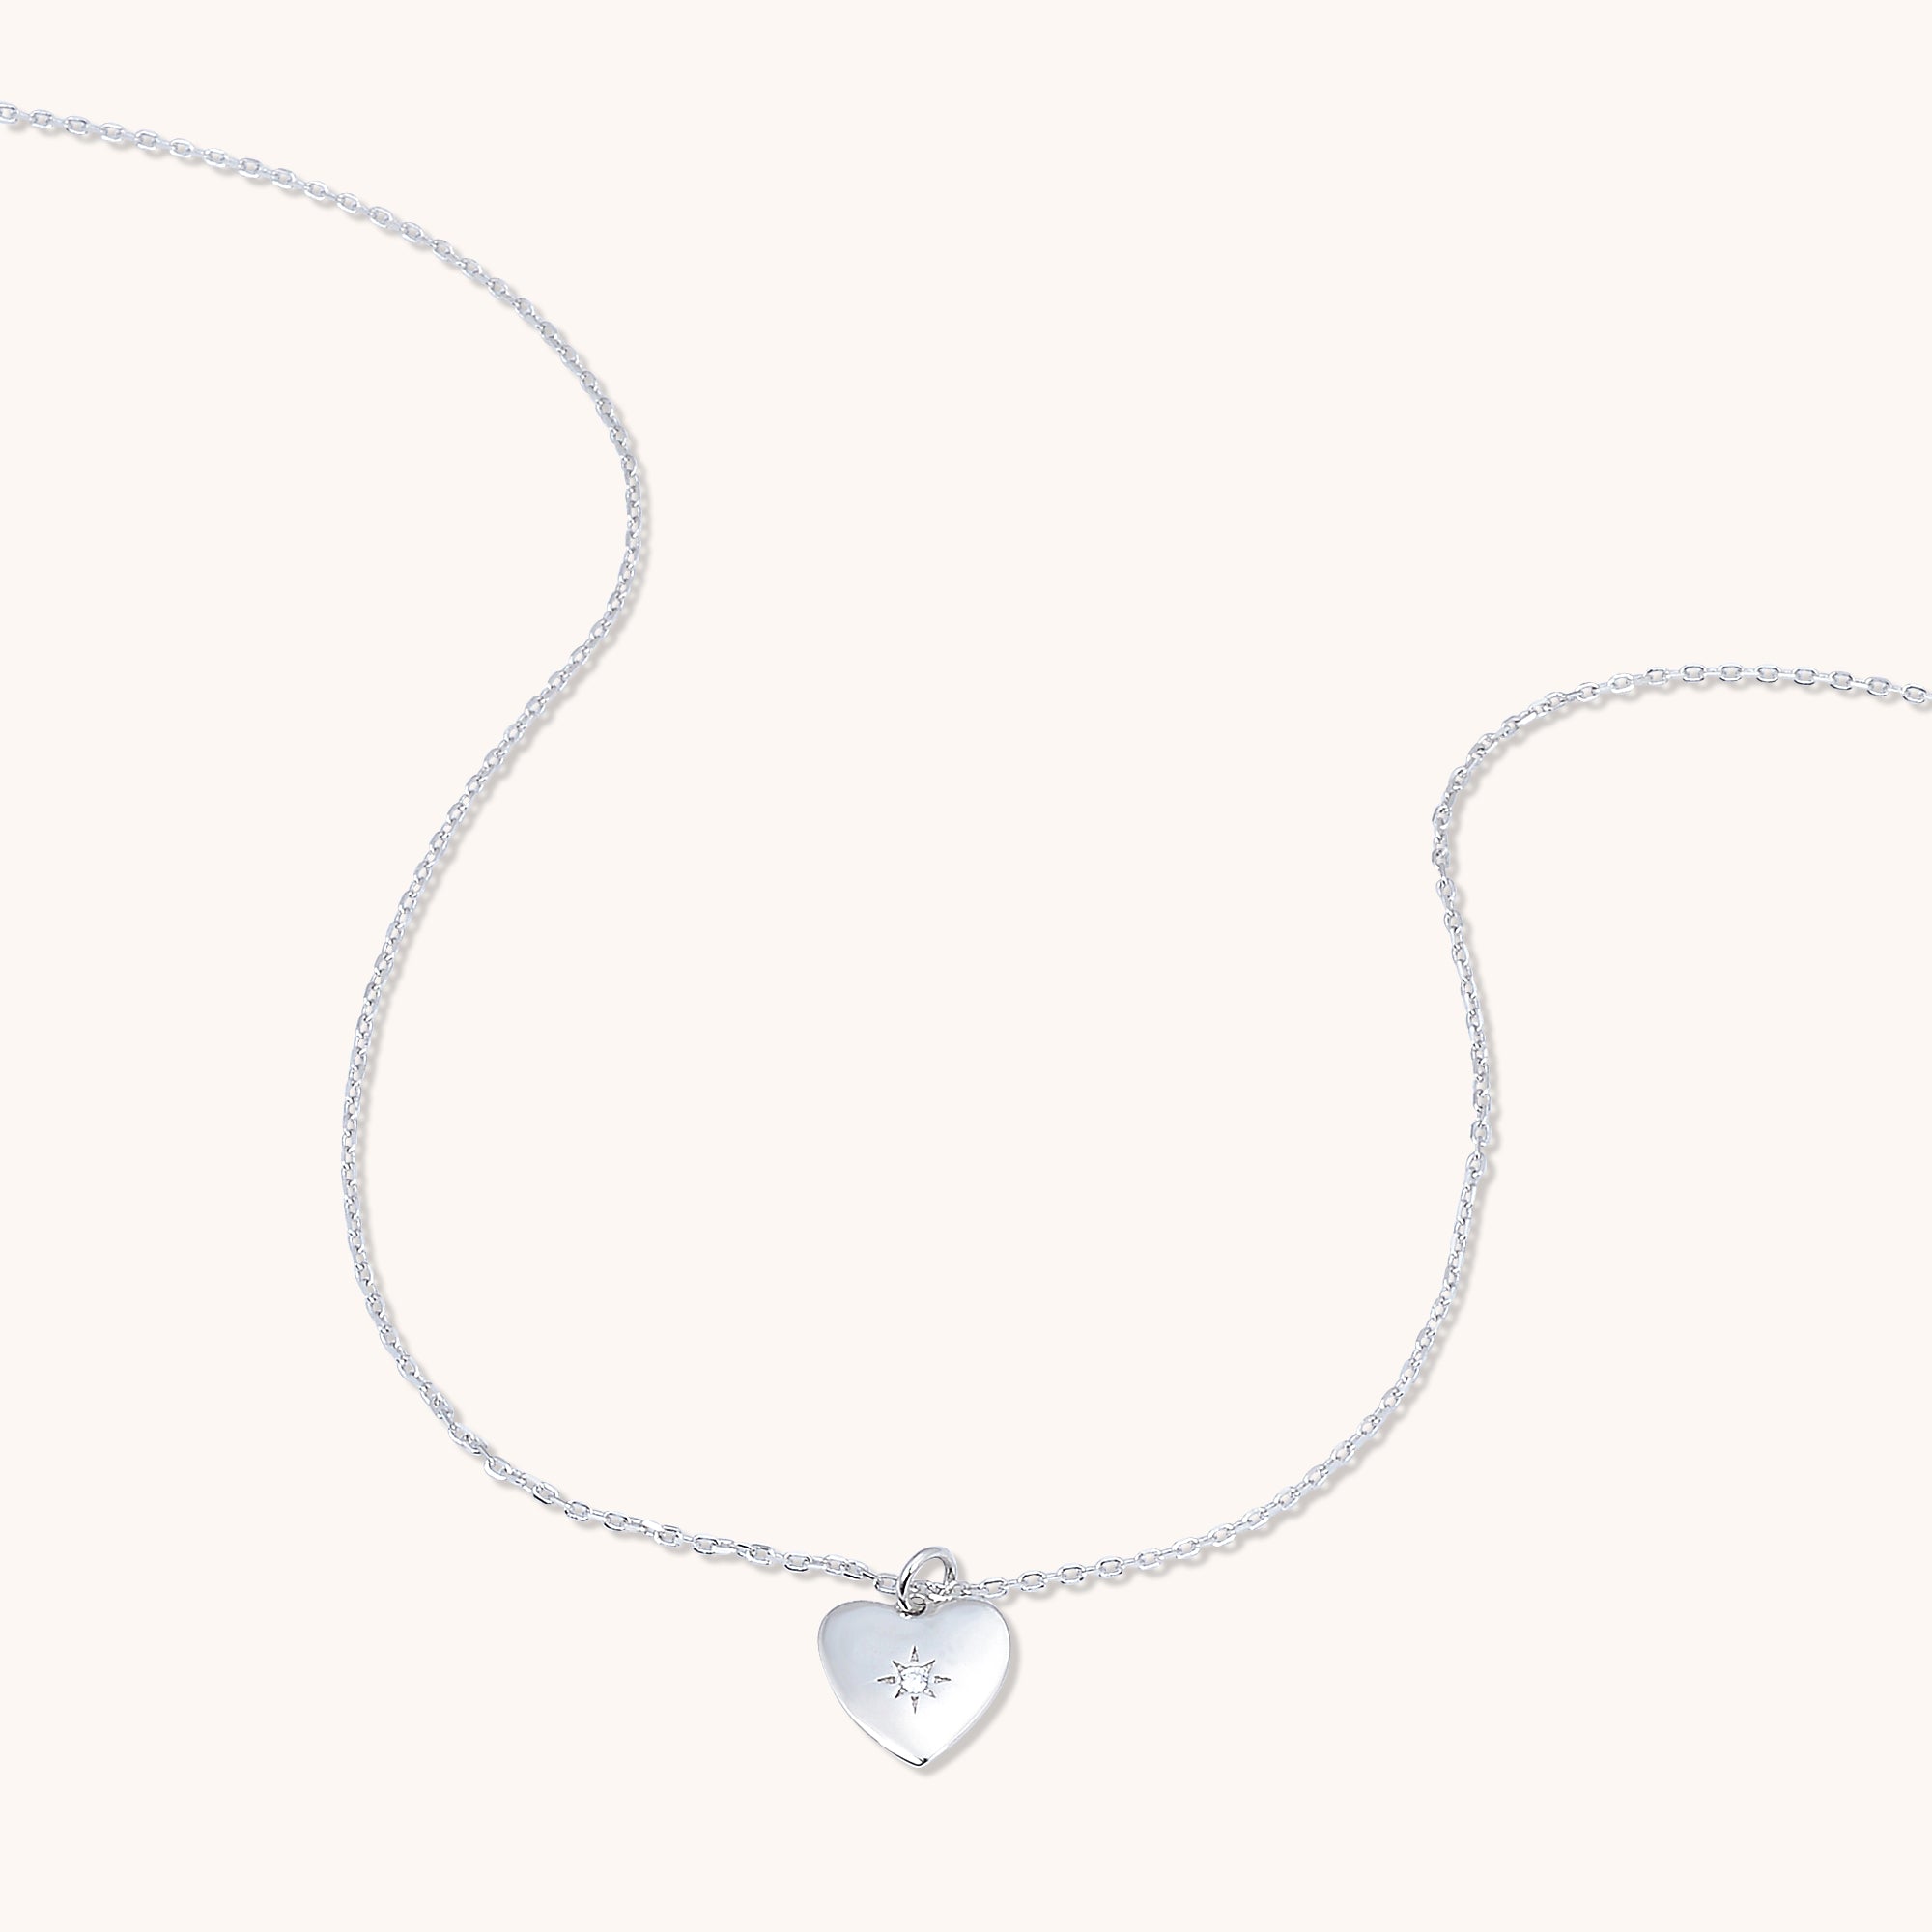 North Star Heart Necklace Silver